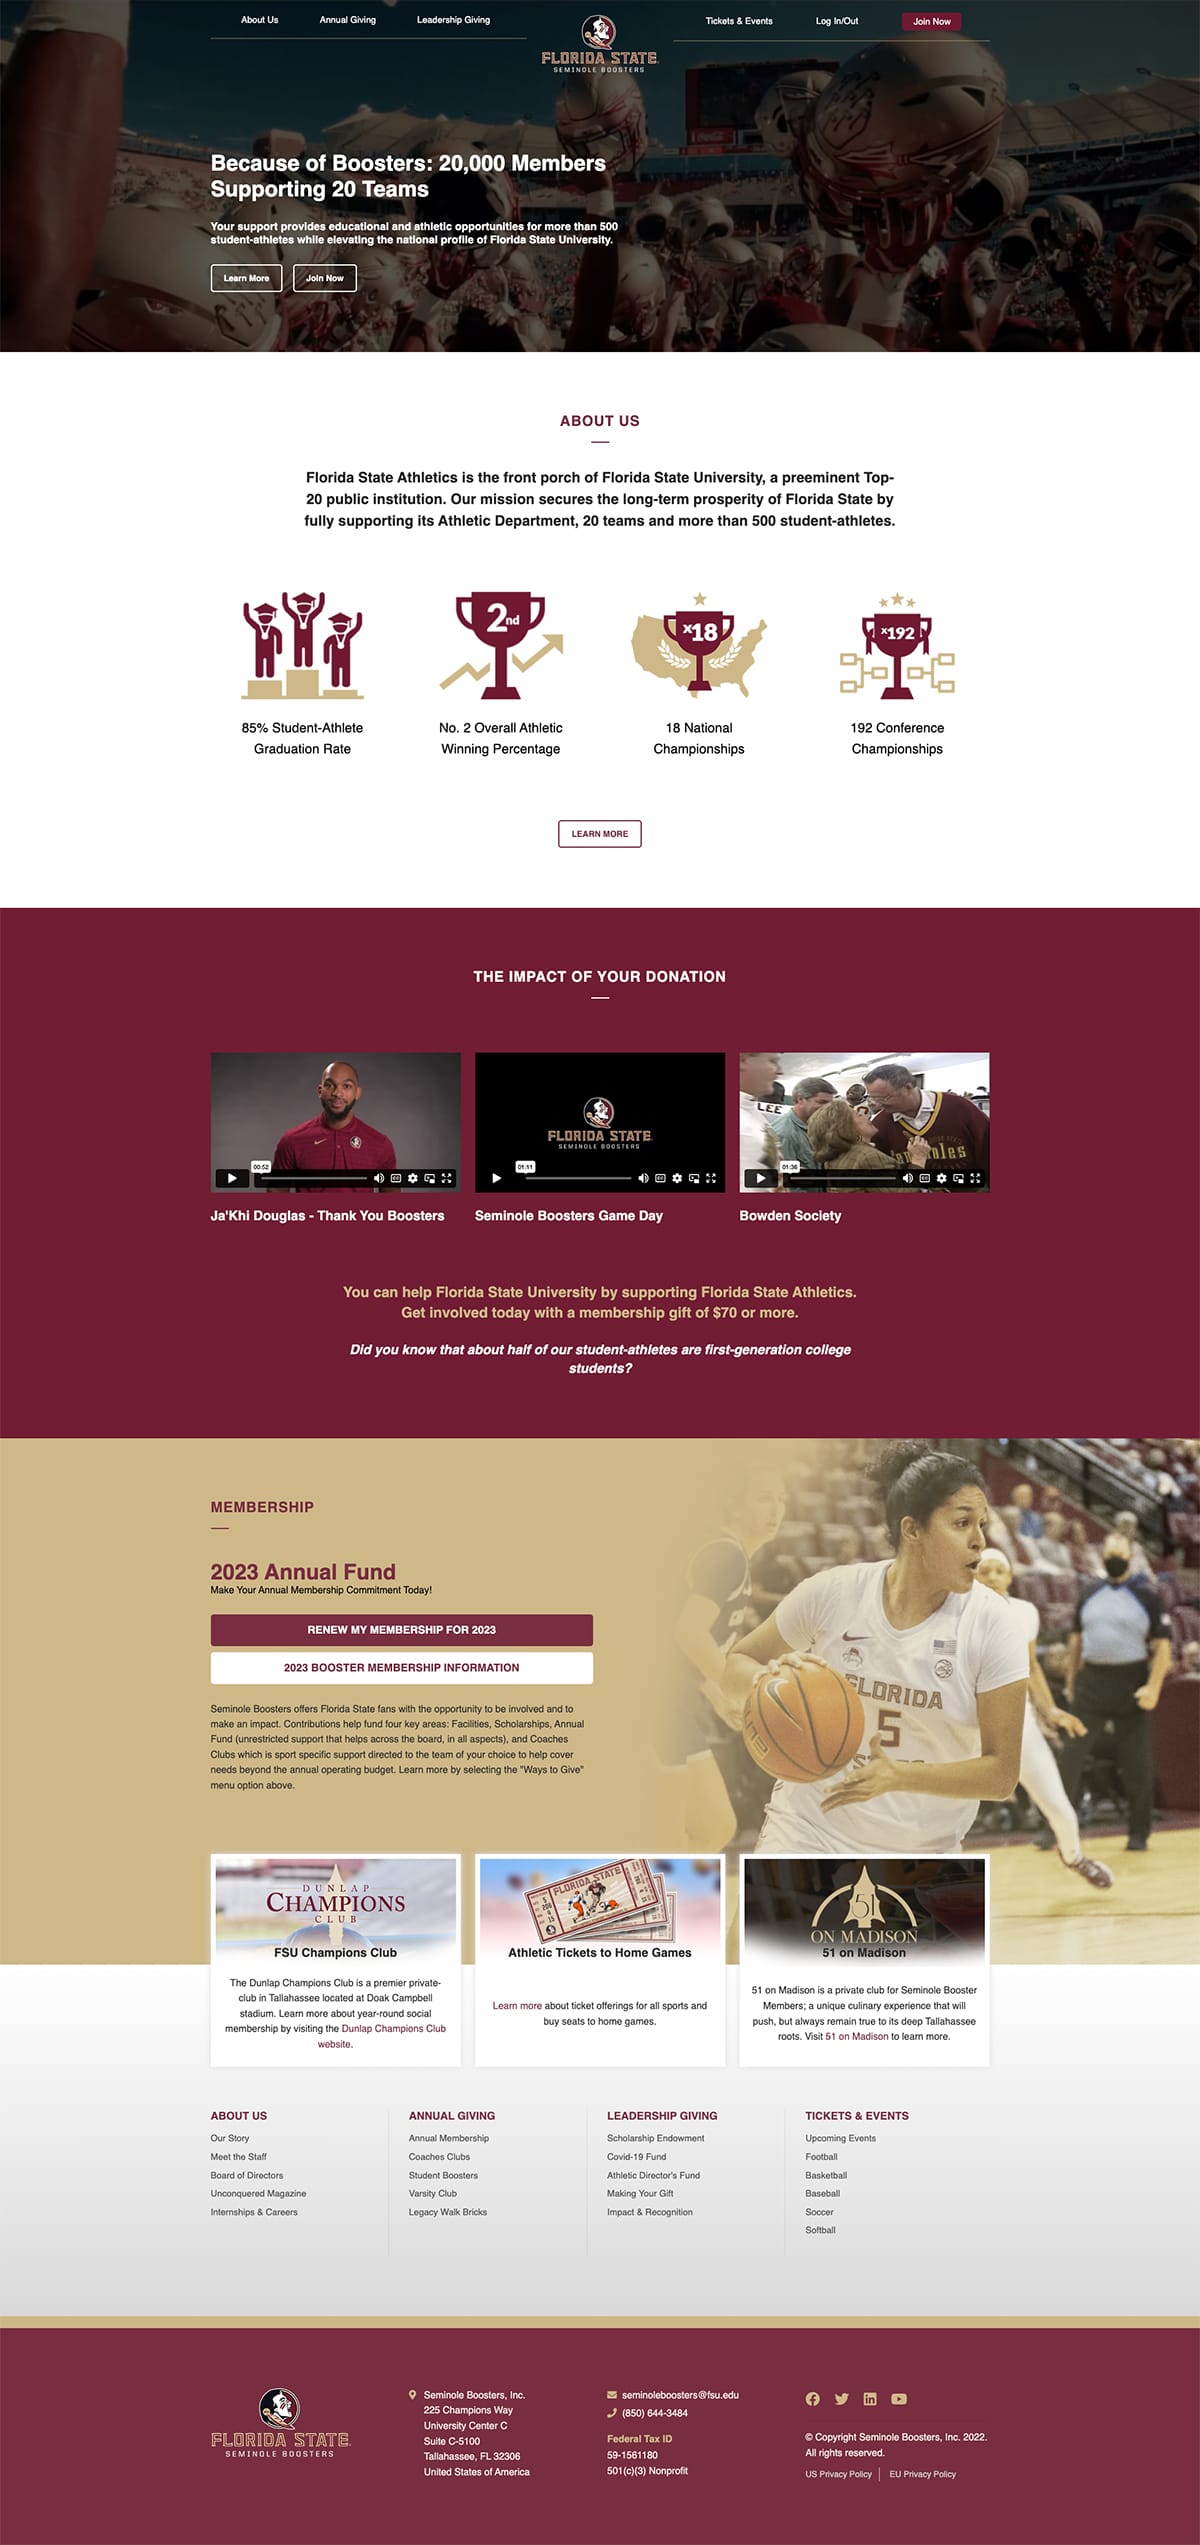 Our redesign of the Seminole Boosters website